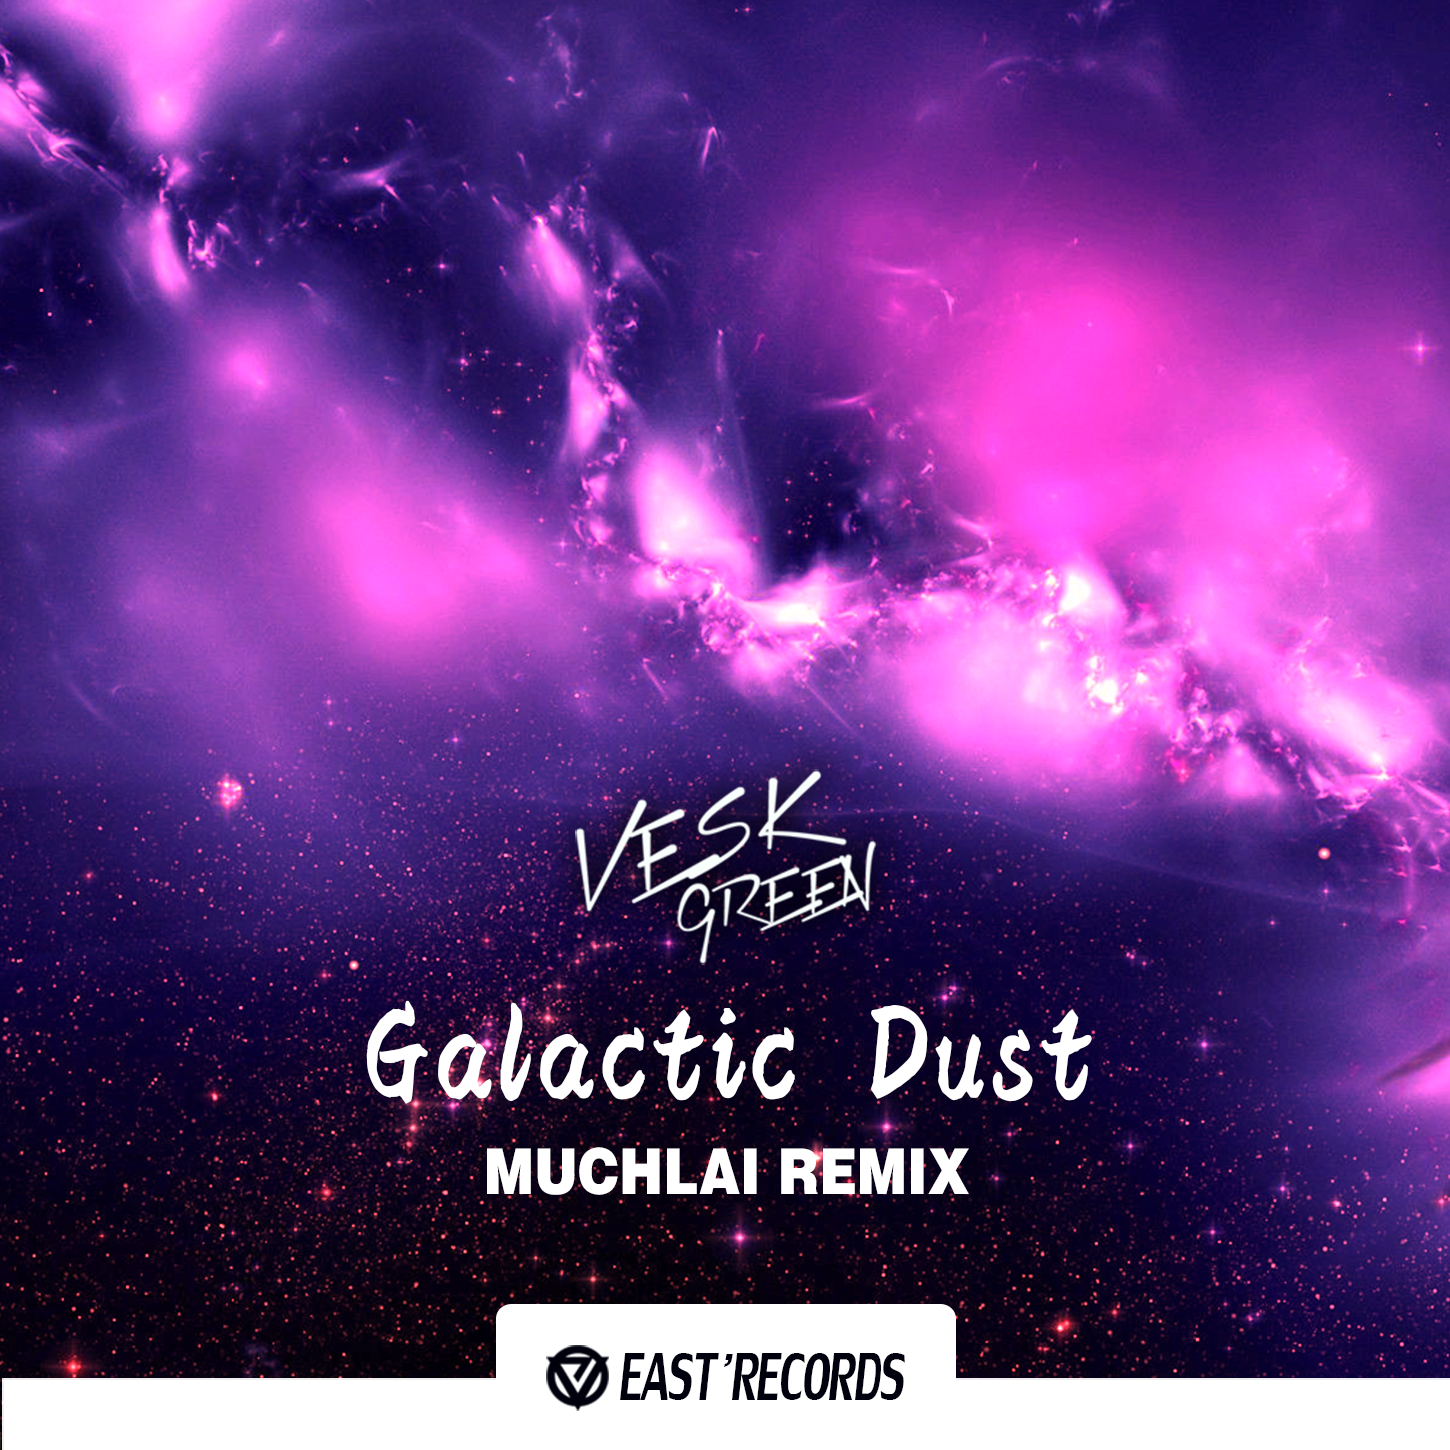 Galactic dust(muchlai remix)